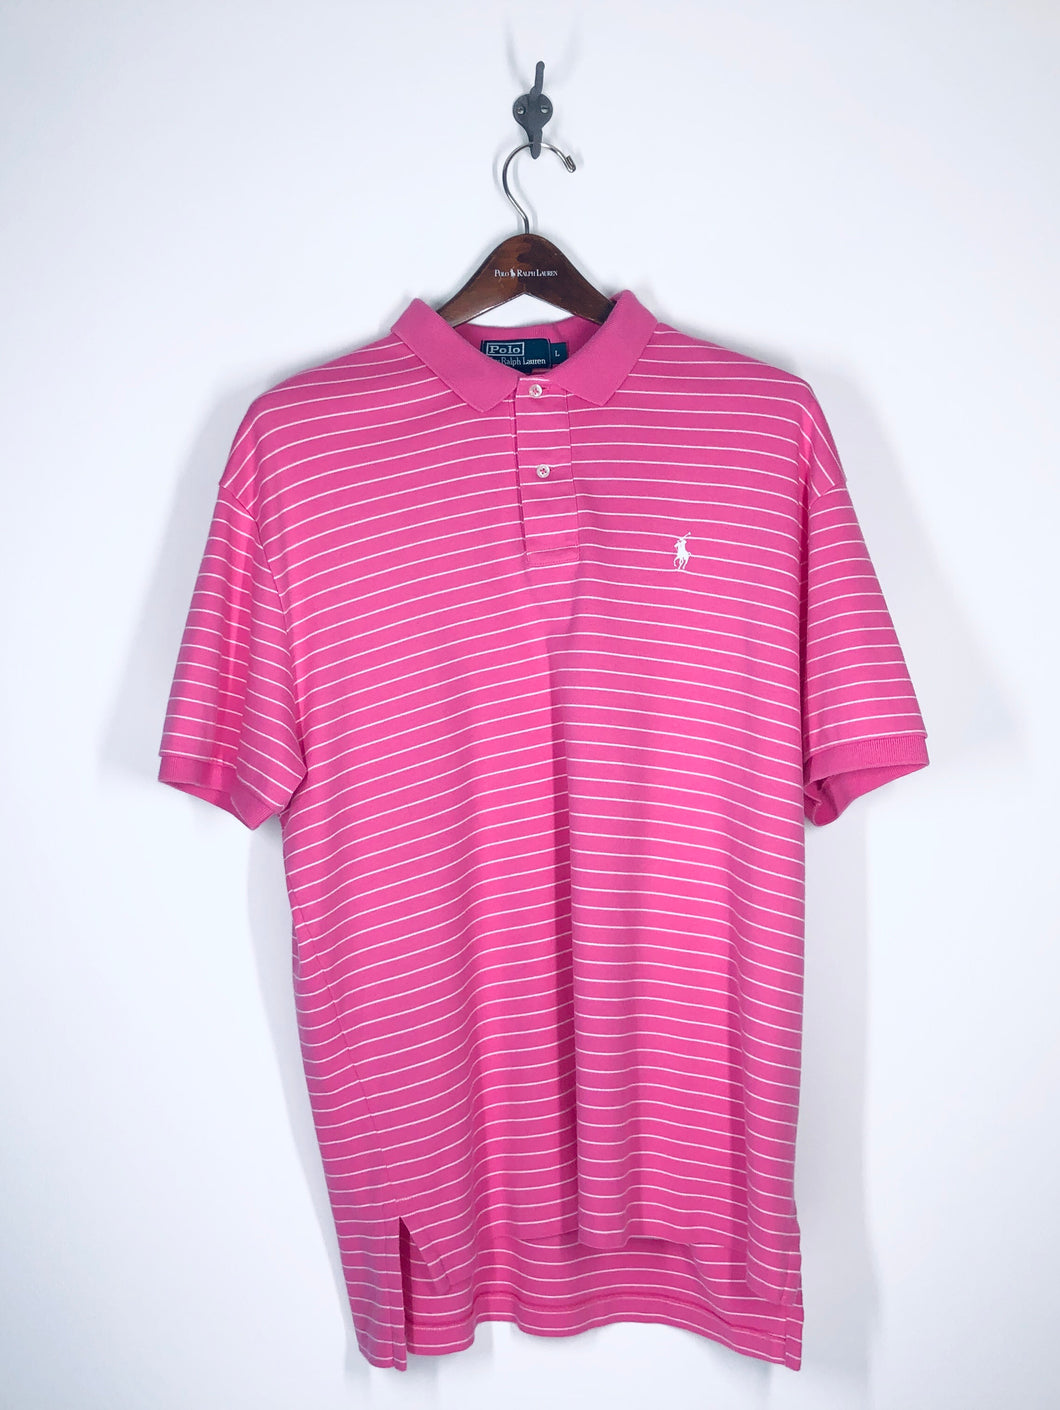 Polo by Ralph Lauren - L - Pink/White - Soft Cotton